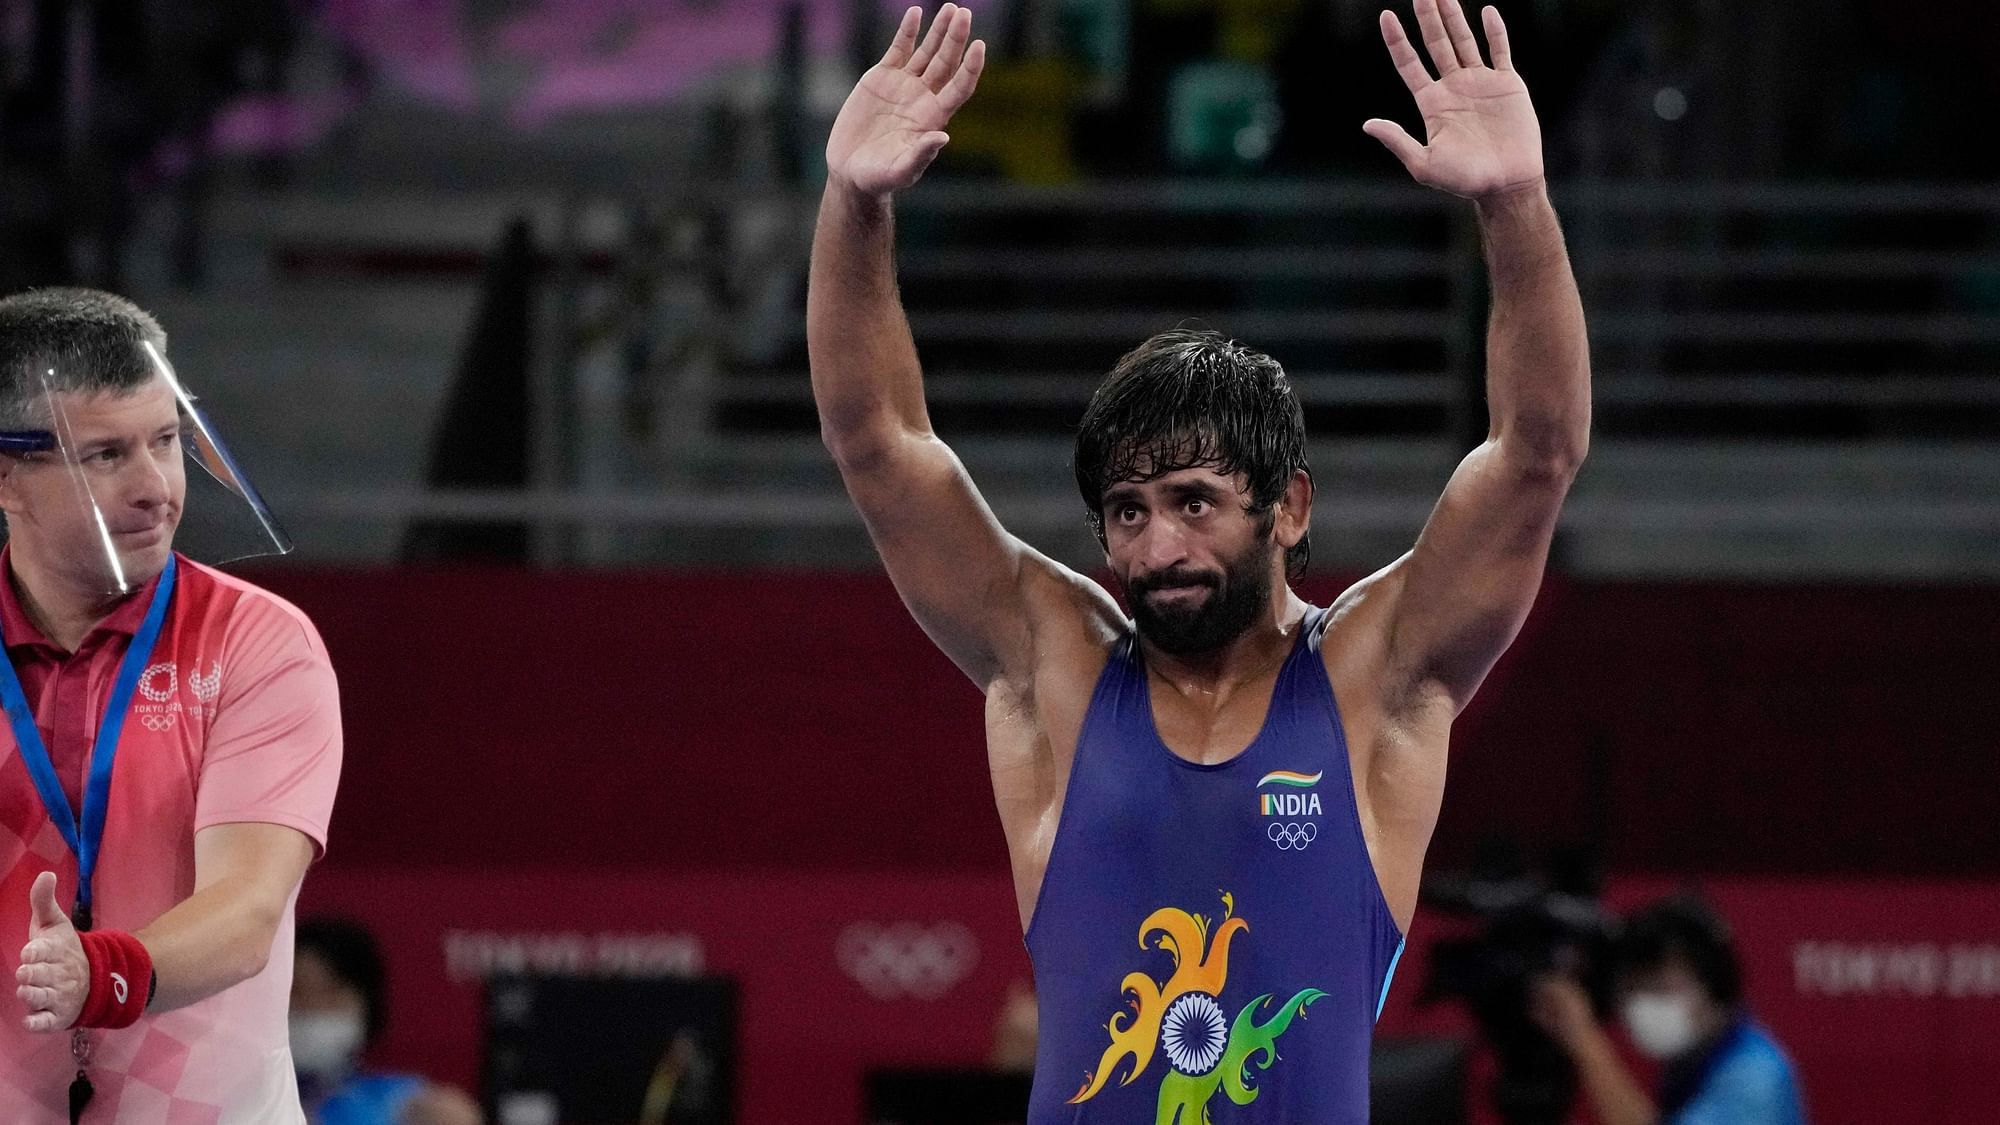 Tokyo Olympics 2020: Bajrang Punia fights injury and opponents to win a bronze medal in wrestling